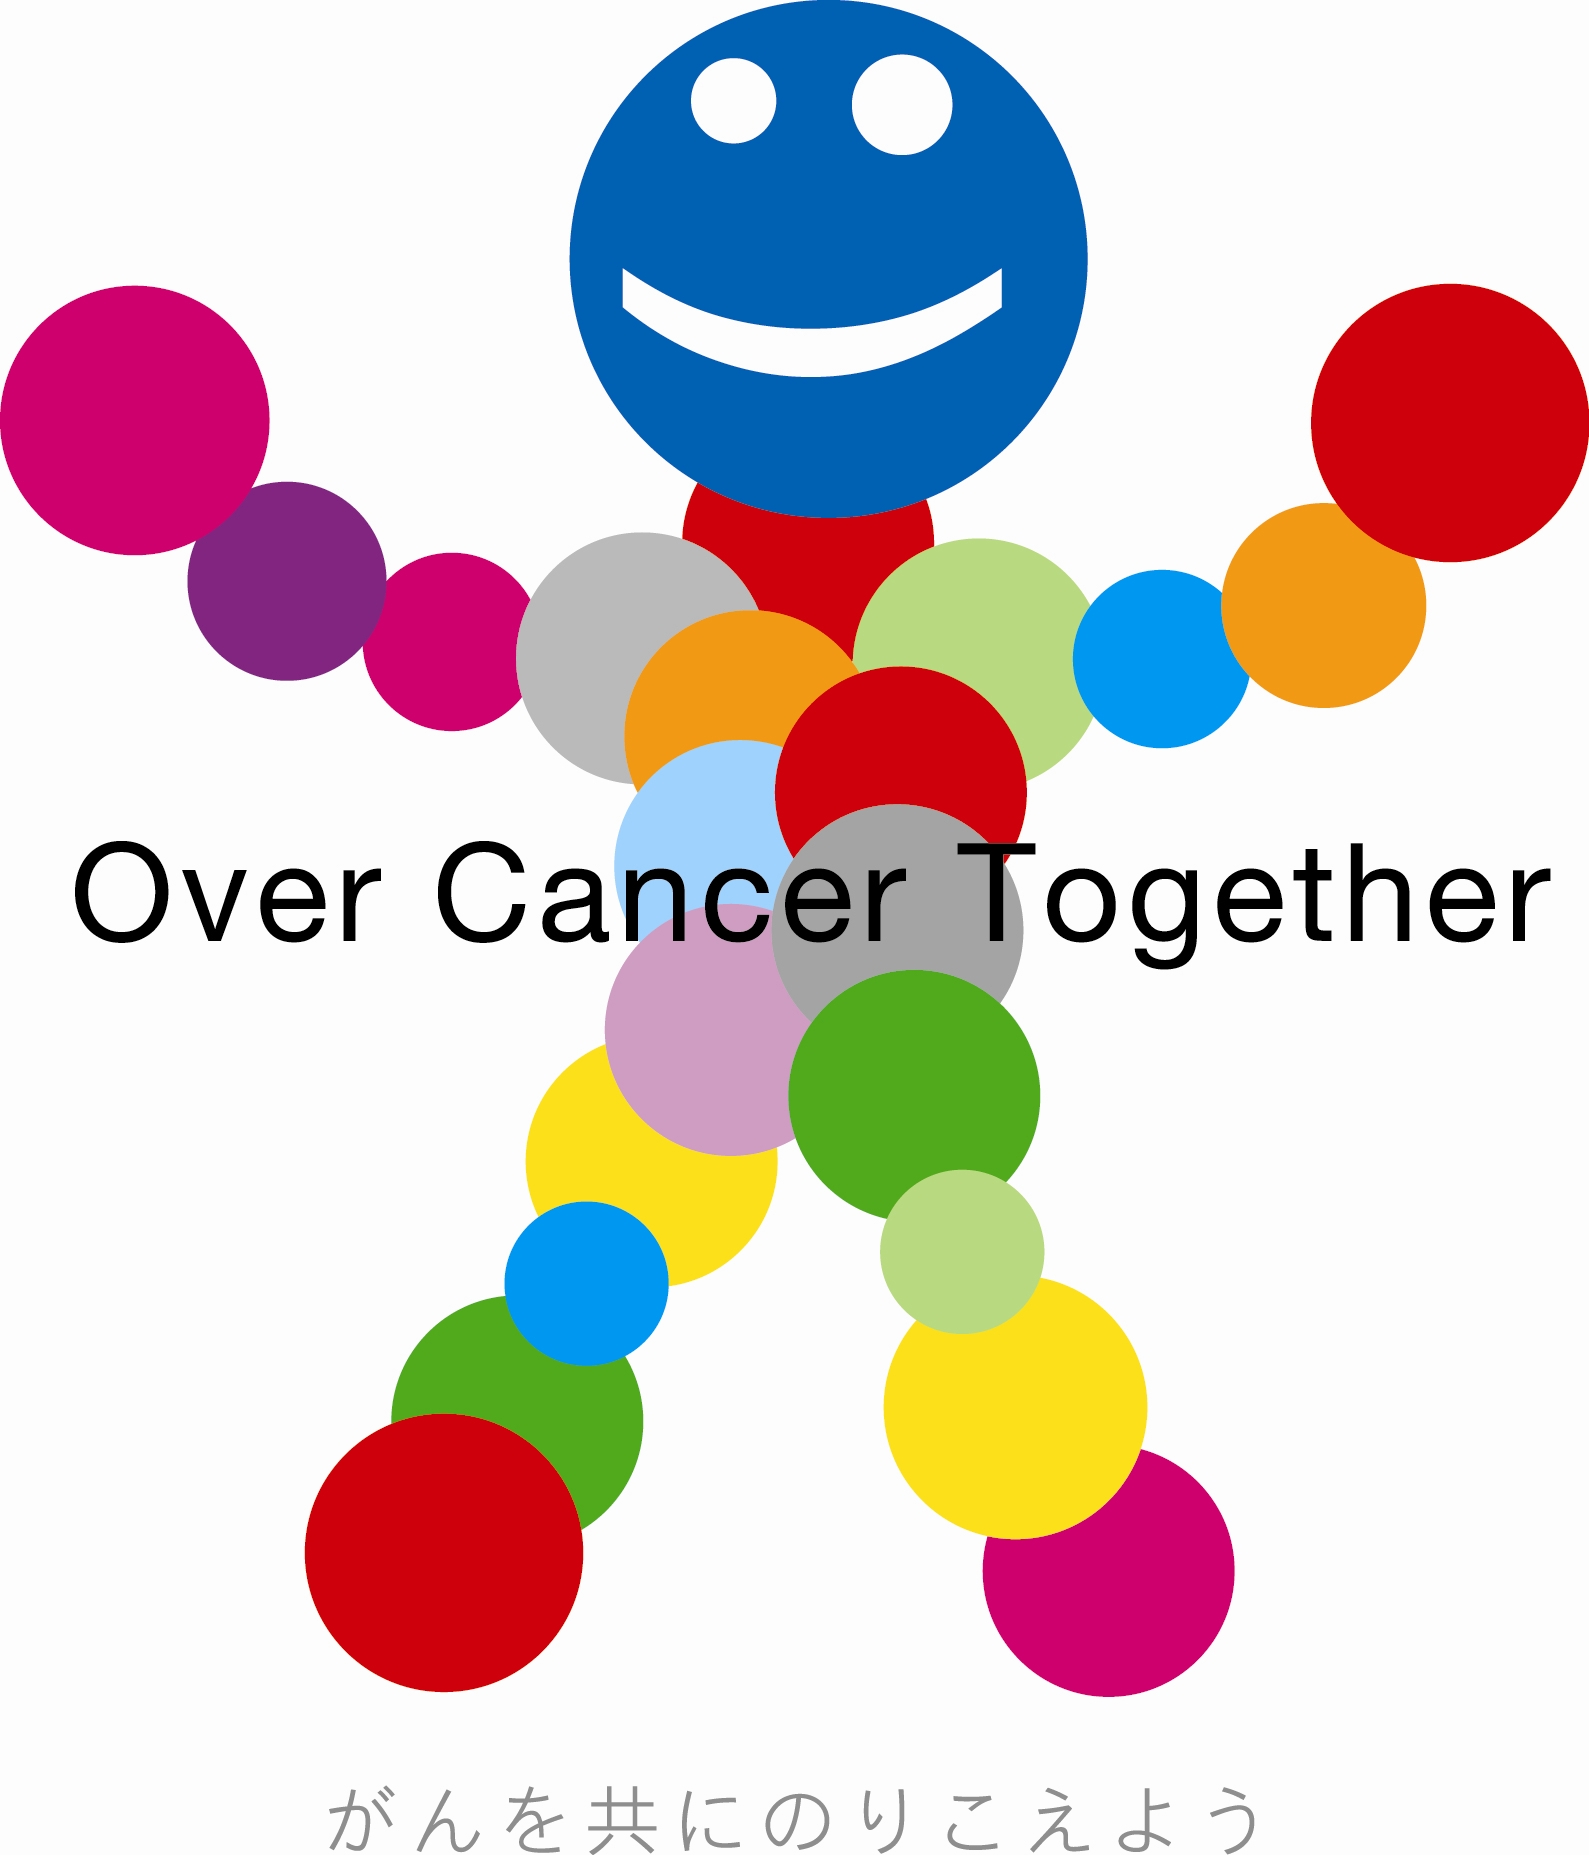 At the reception a vote was also carried out for determining the logo for the campaign. The logo was created by designer Mr.Haruhiko Hirota, who incorporated the ideas behind the campaign to develop an illustration that represented the involvement and support of many different people and many types of cancer by using a collection of colorful circles. The English strapline of ‘Over Cancer Together’ is superimposed on the image, giving the appearance of the figure approaching a finish line tape comprising the objective of this campaign.